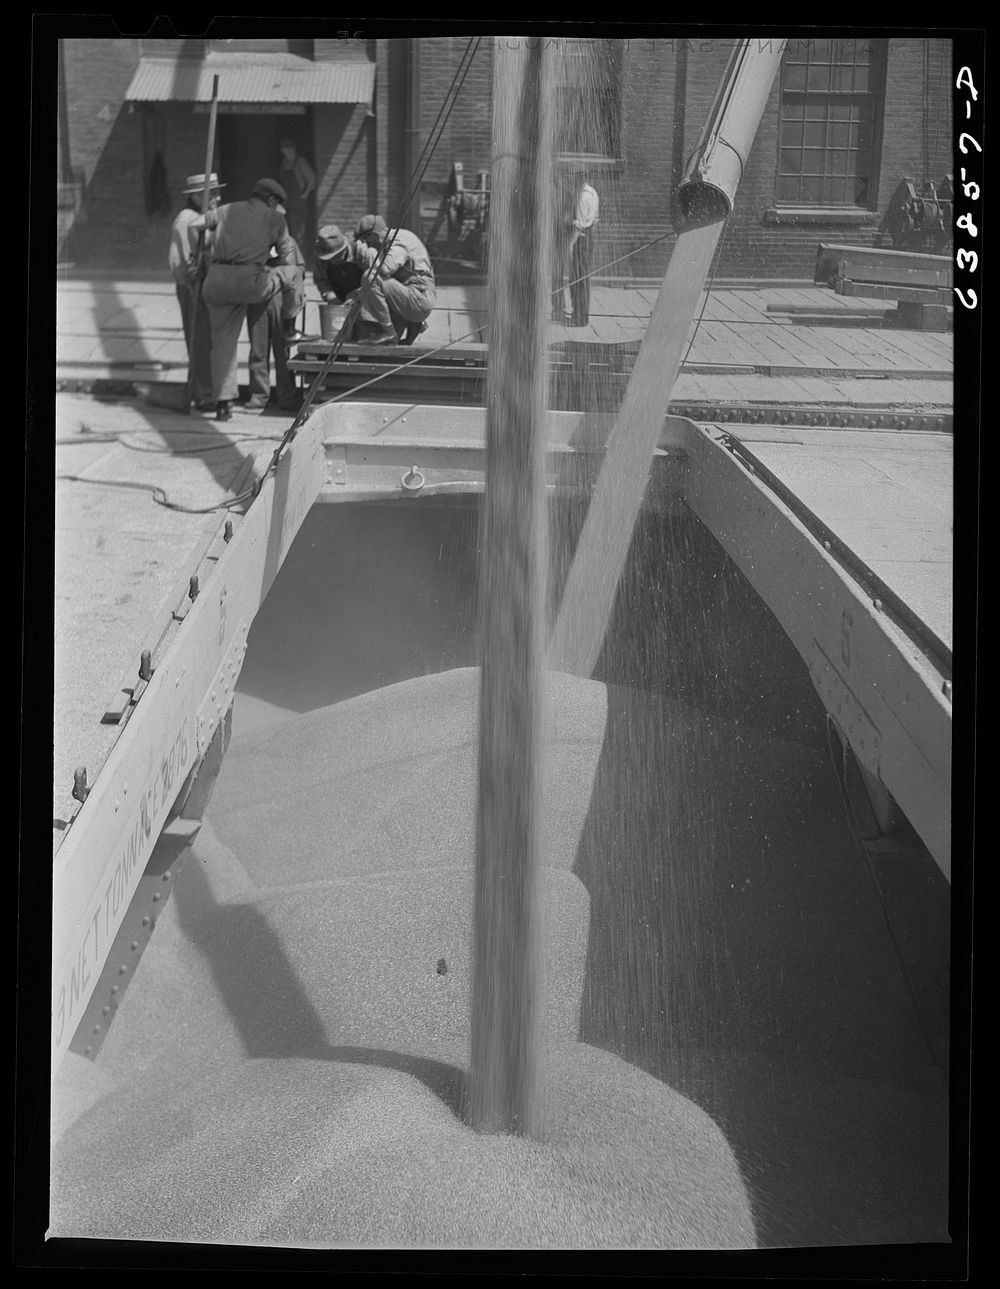 Loading grain into hold of Great Lakes boat. Superior, Wisconsin. Sourced from the Library of Congress.